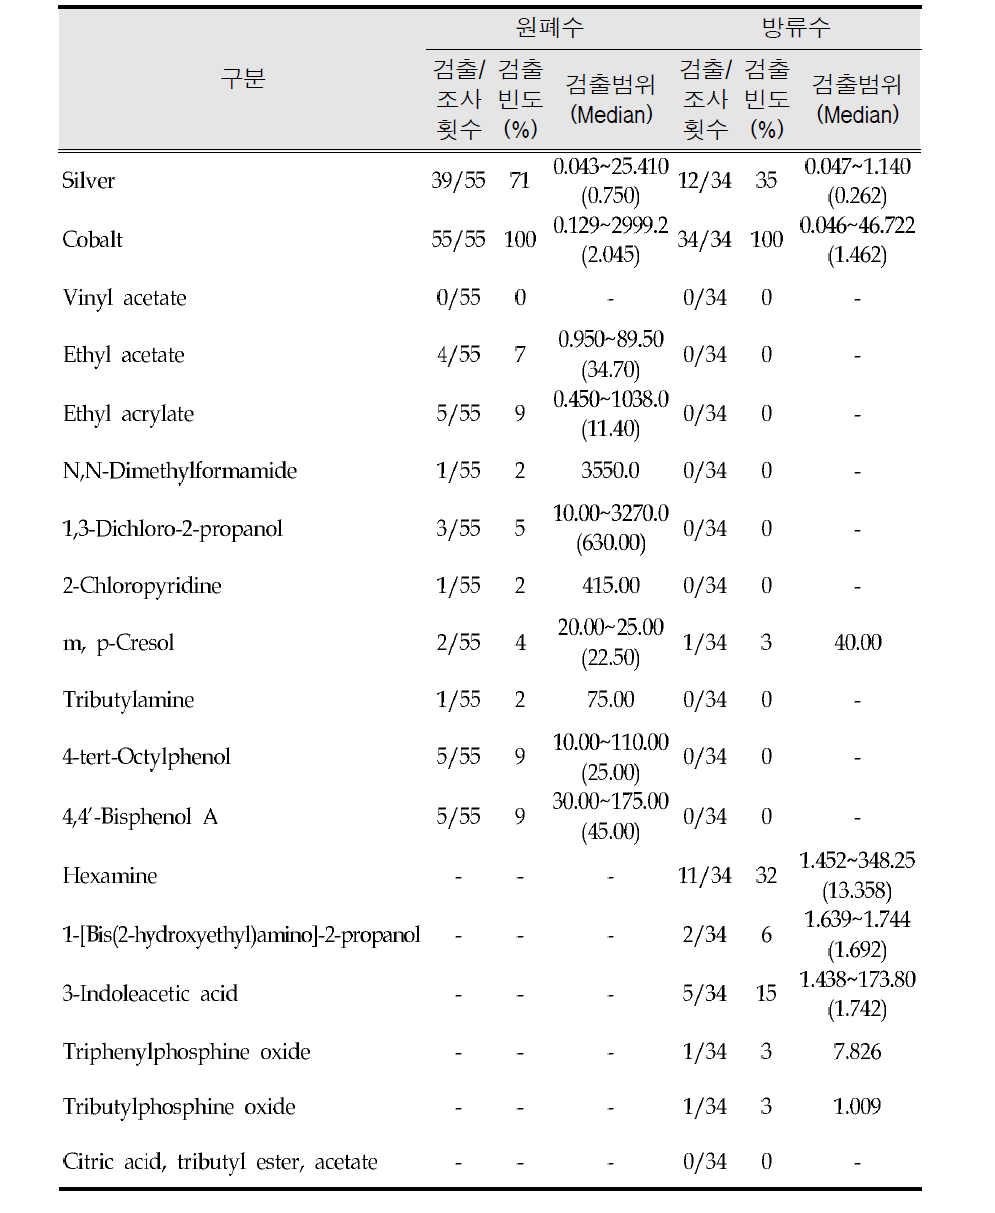 Concentrations found in wastewater discharge facilities surveyed in this study (㎍/L)